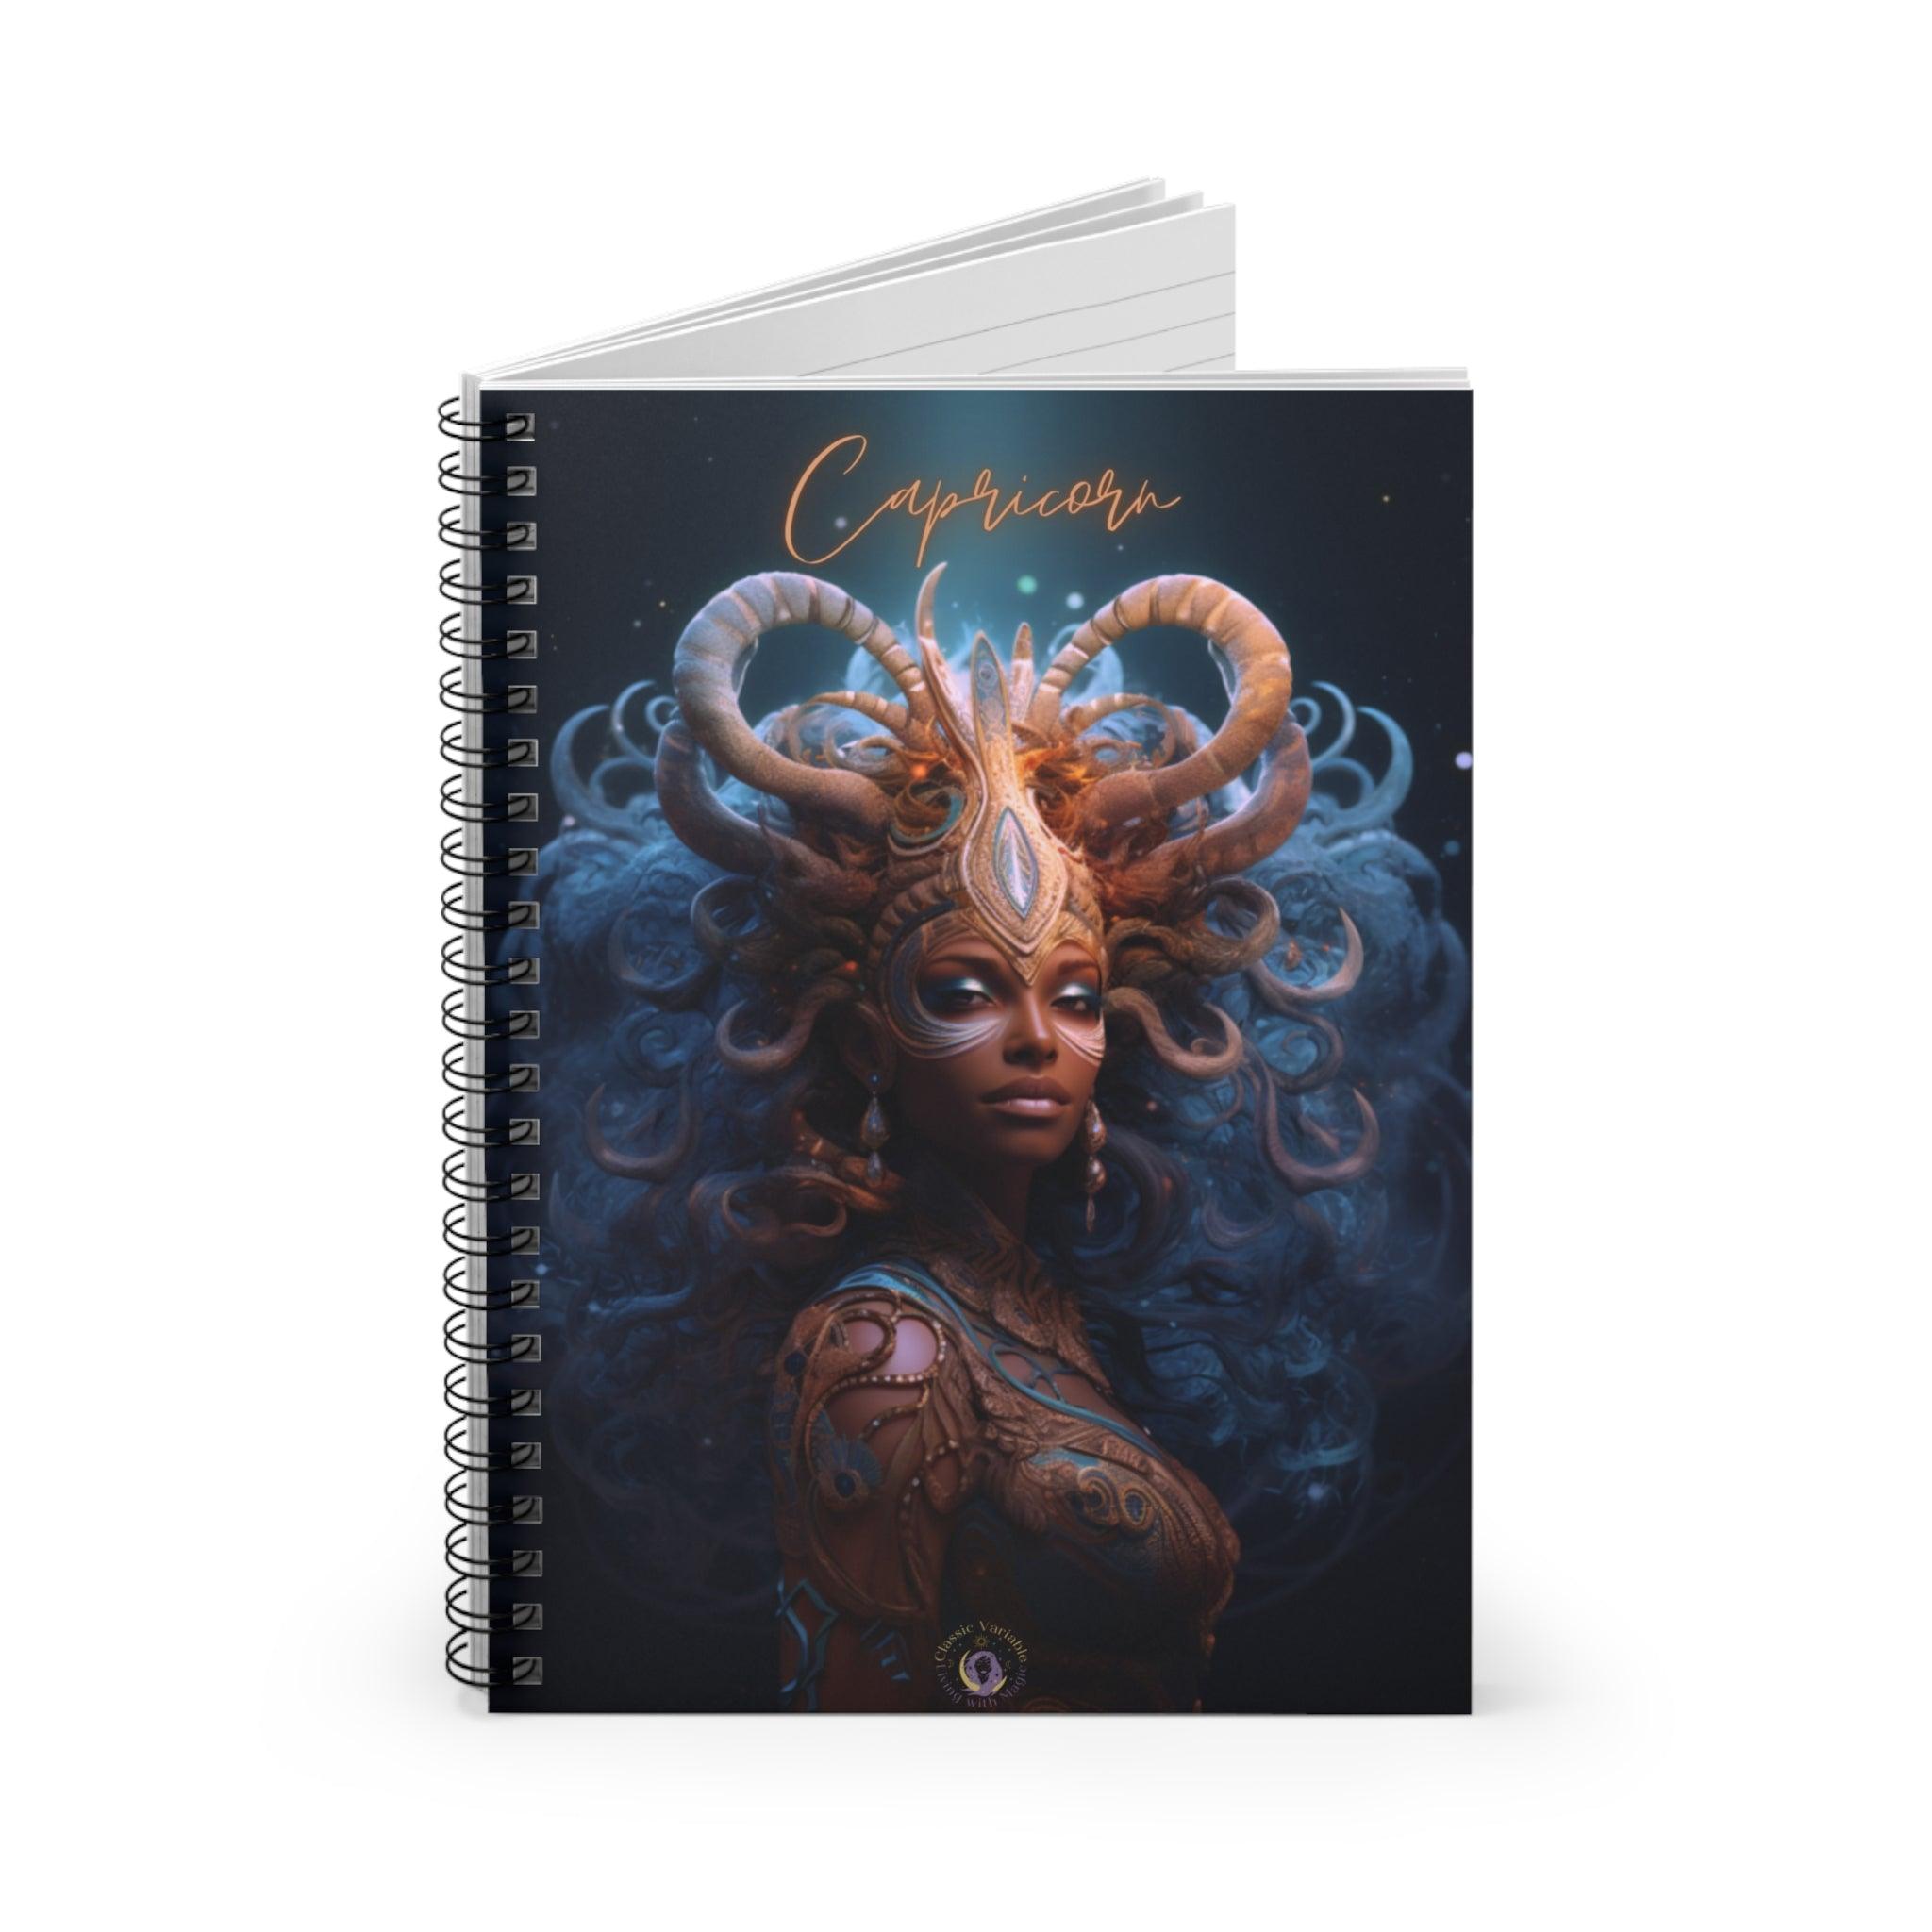 Capricorn Spiral Notebook - Ruled Line - Classic Variable